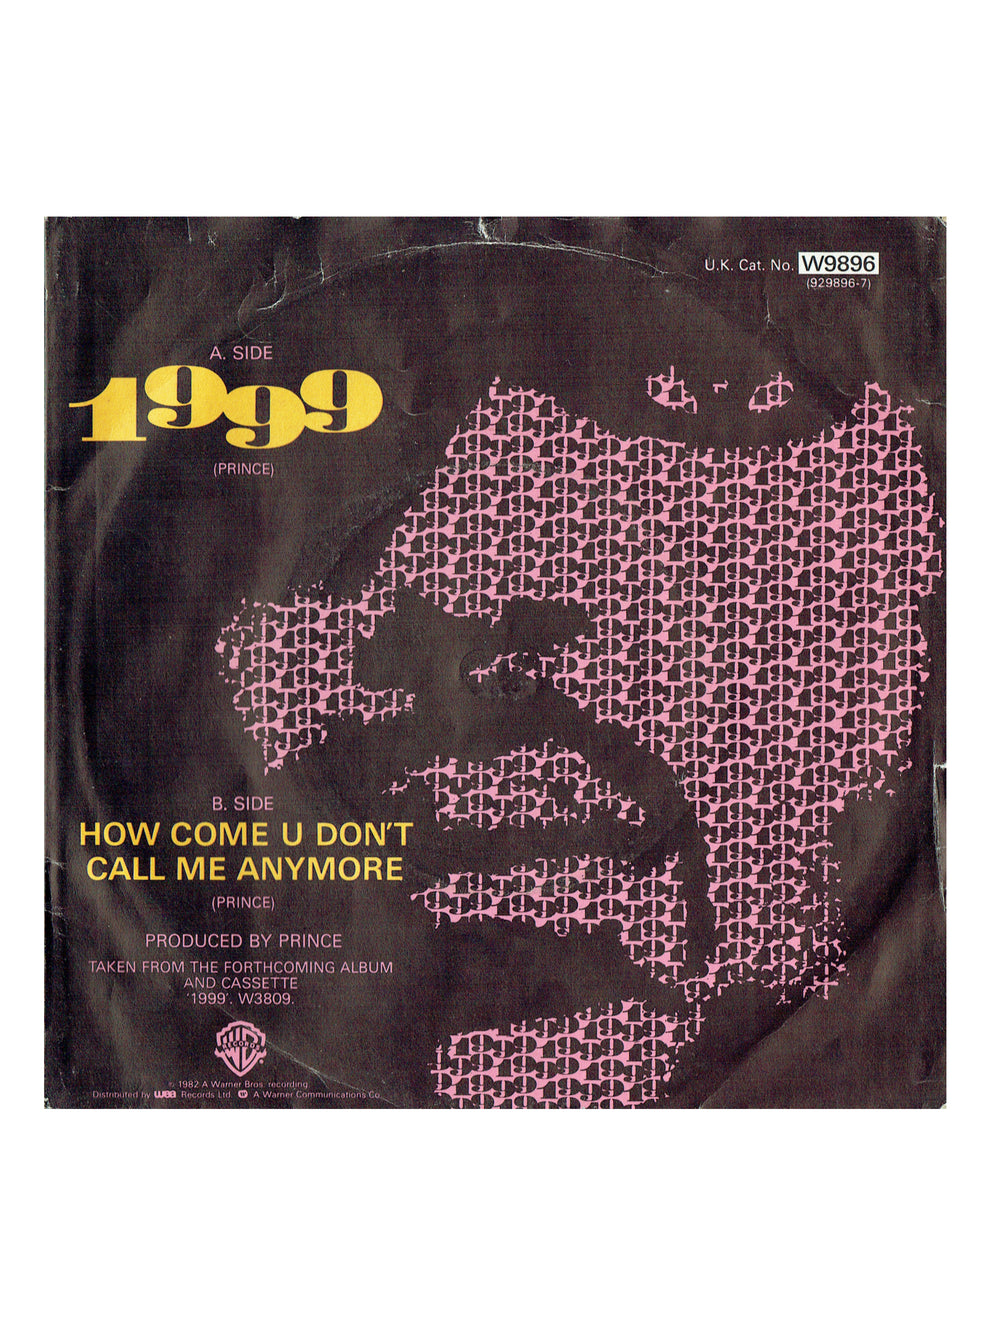 Prince 1999 / How Come U Don't 7 Inch Single PS Release 1982 UK